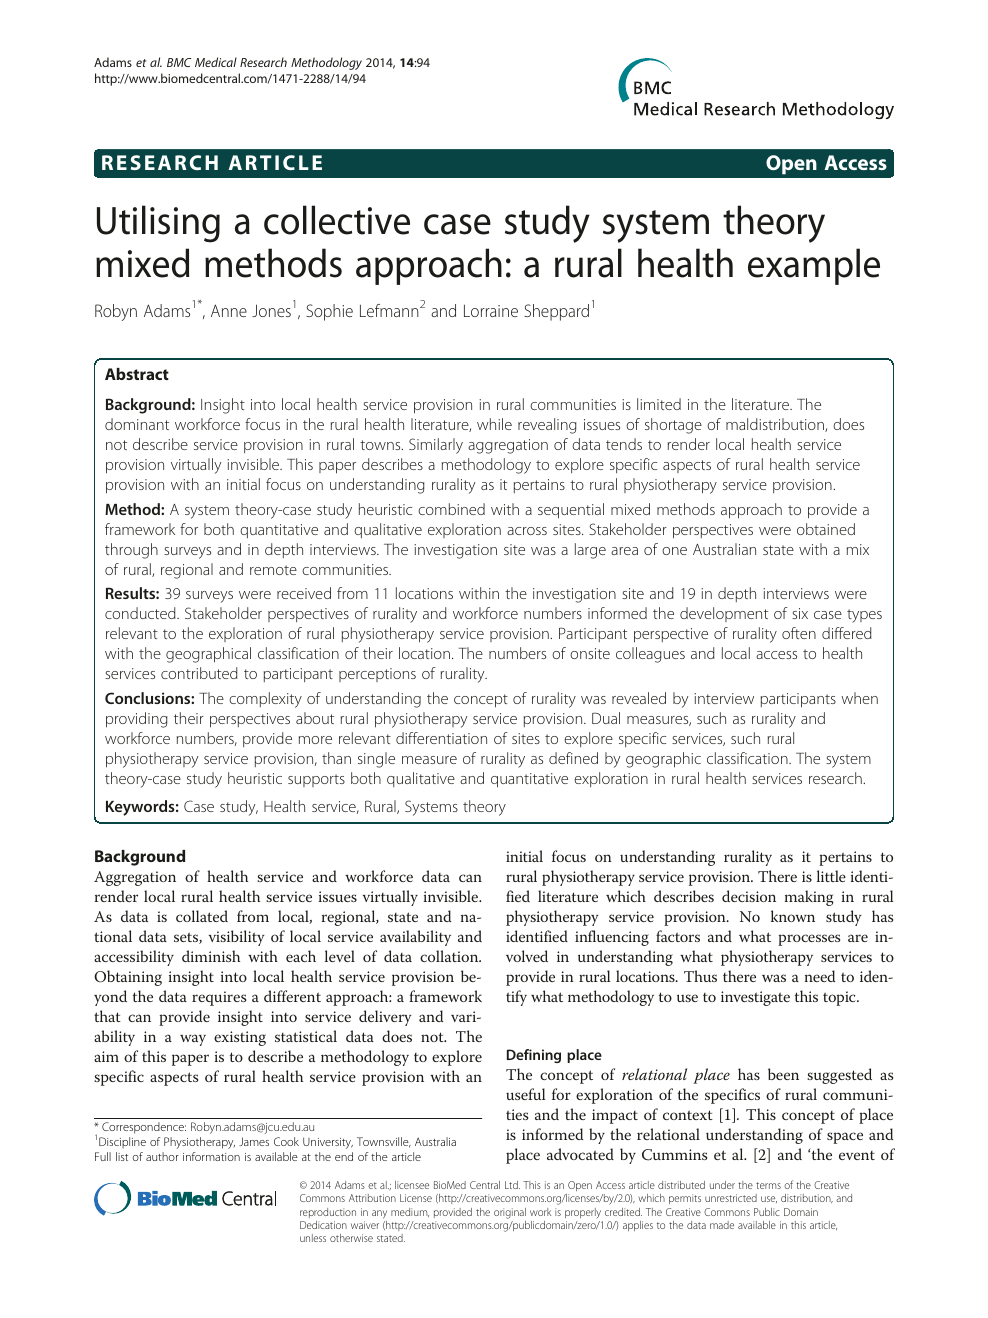 Utilising A Collective Case Study System Theory Mixed Methods Approach A Rural Health Example Topic Of Research Paper In Health Sciences Download Scholarly Article Pdf And Read For Free On Cyberleninka